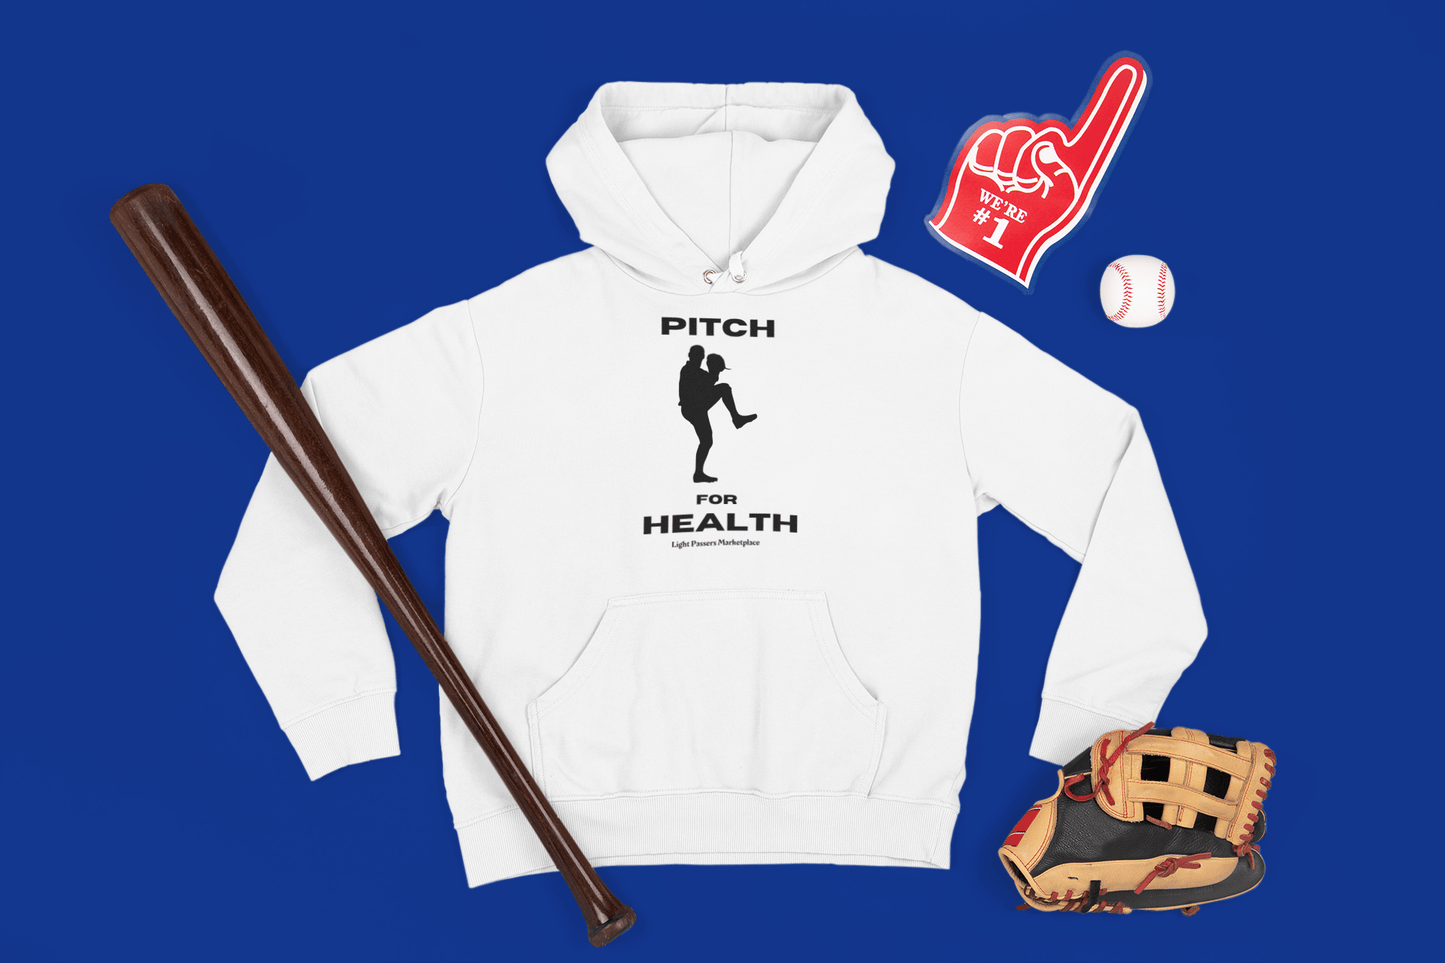 A white youth hooded sweatshirt featuring a baseball bat and glove design, with a kangaroo pocket and reinforced neck. Made of 50% cotton, 50% polyester for comfort and print quality.